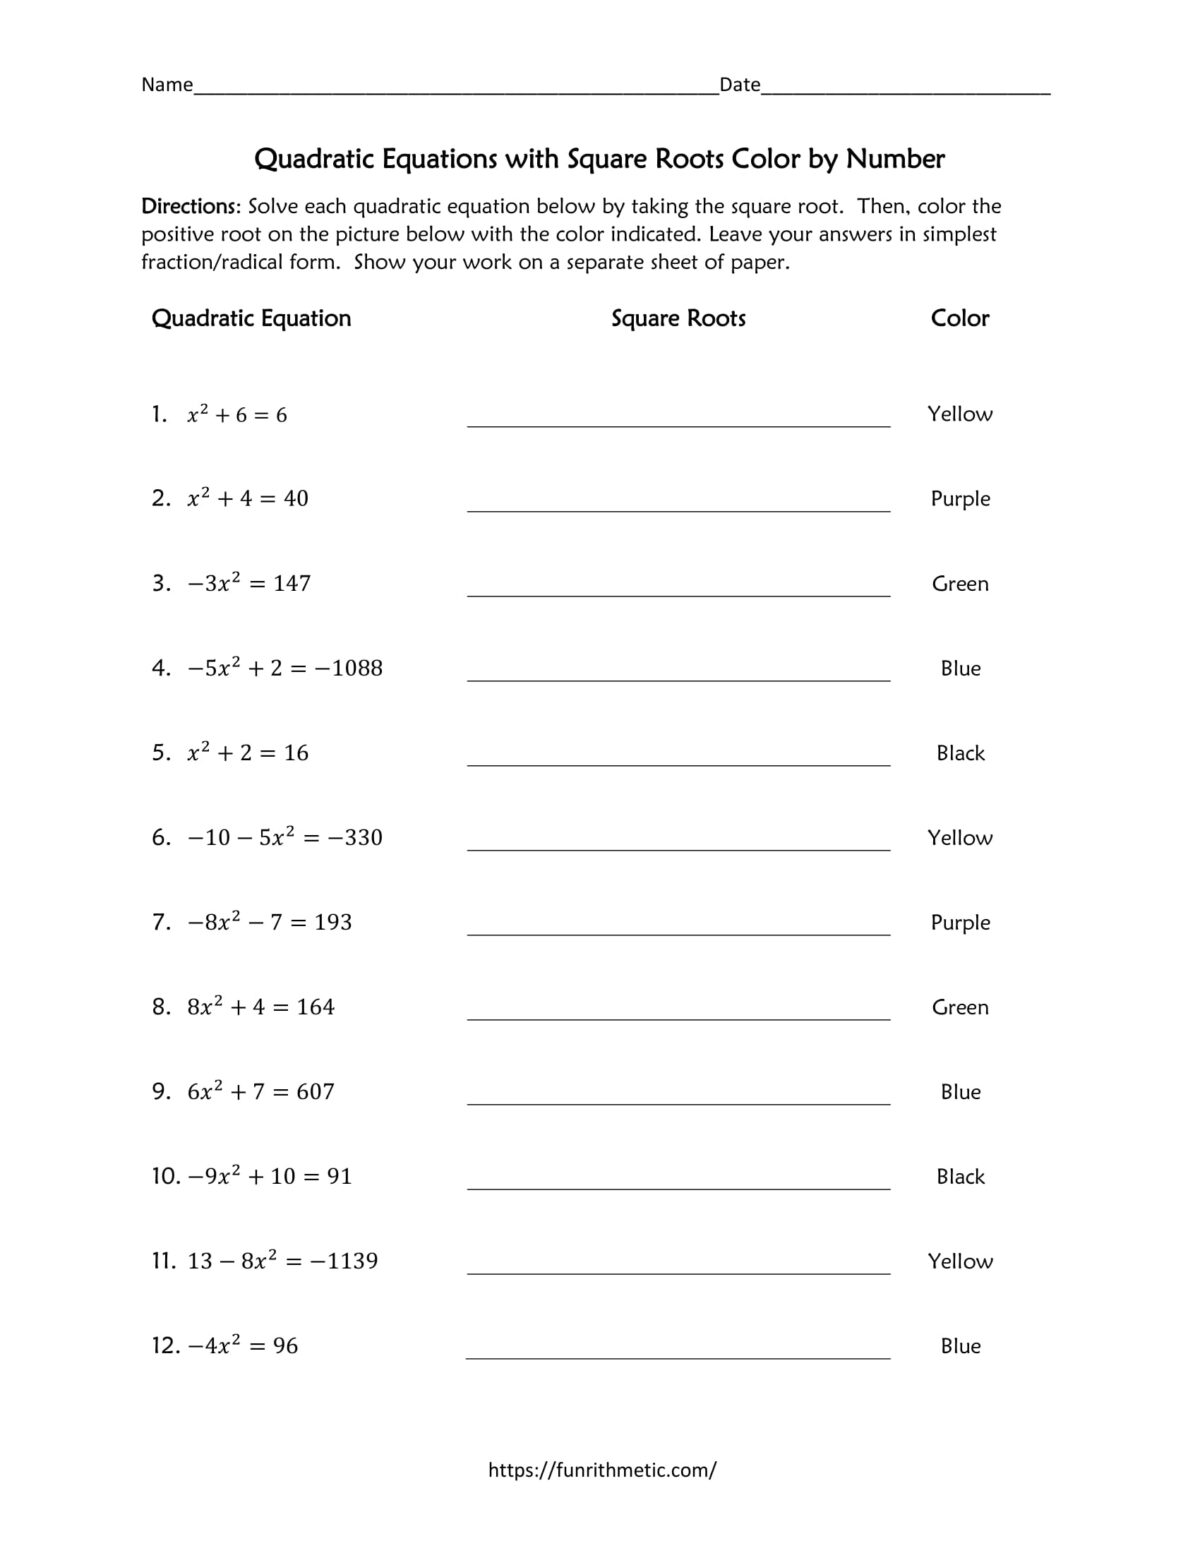 Quadratic Equations with Square Roots worksheet